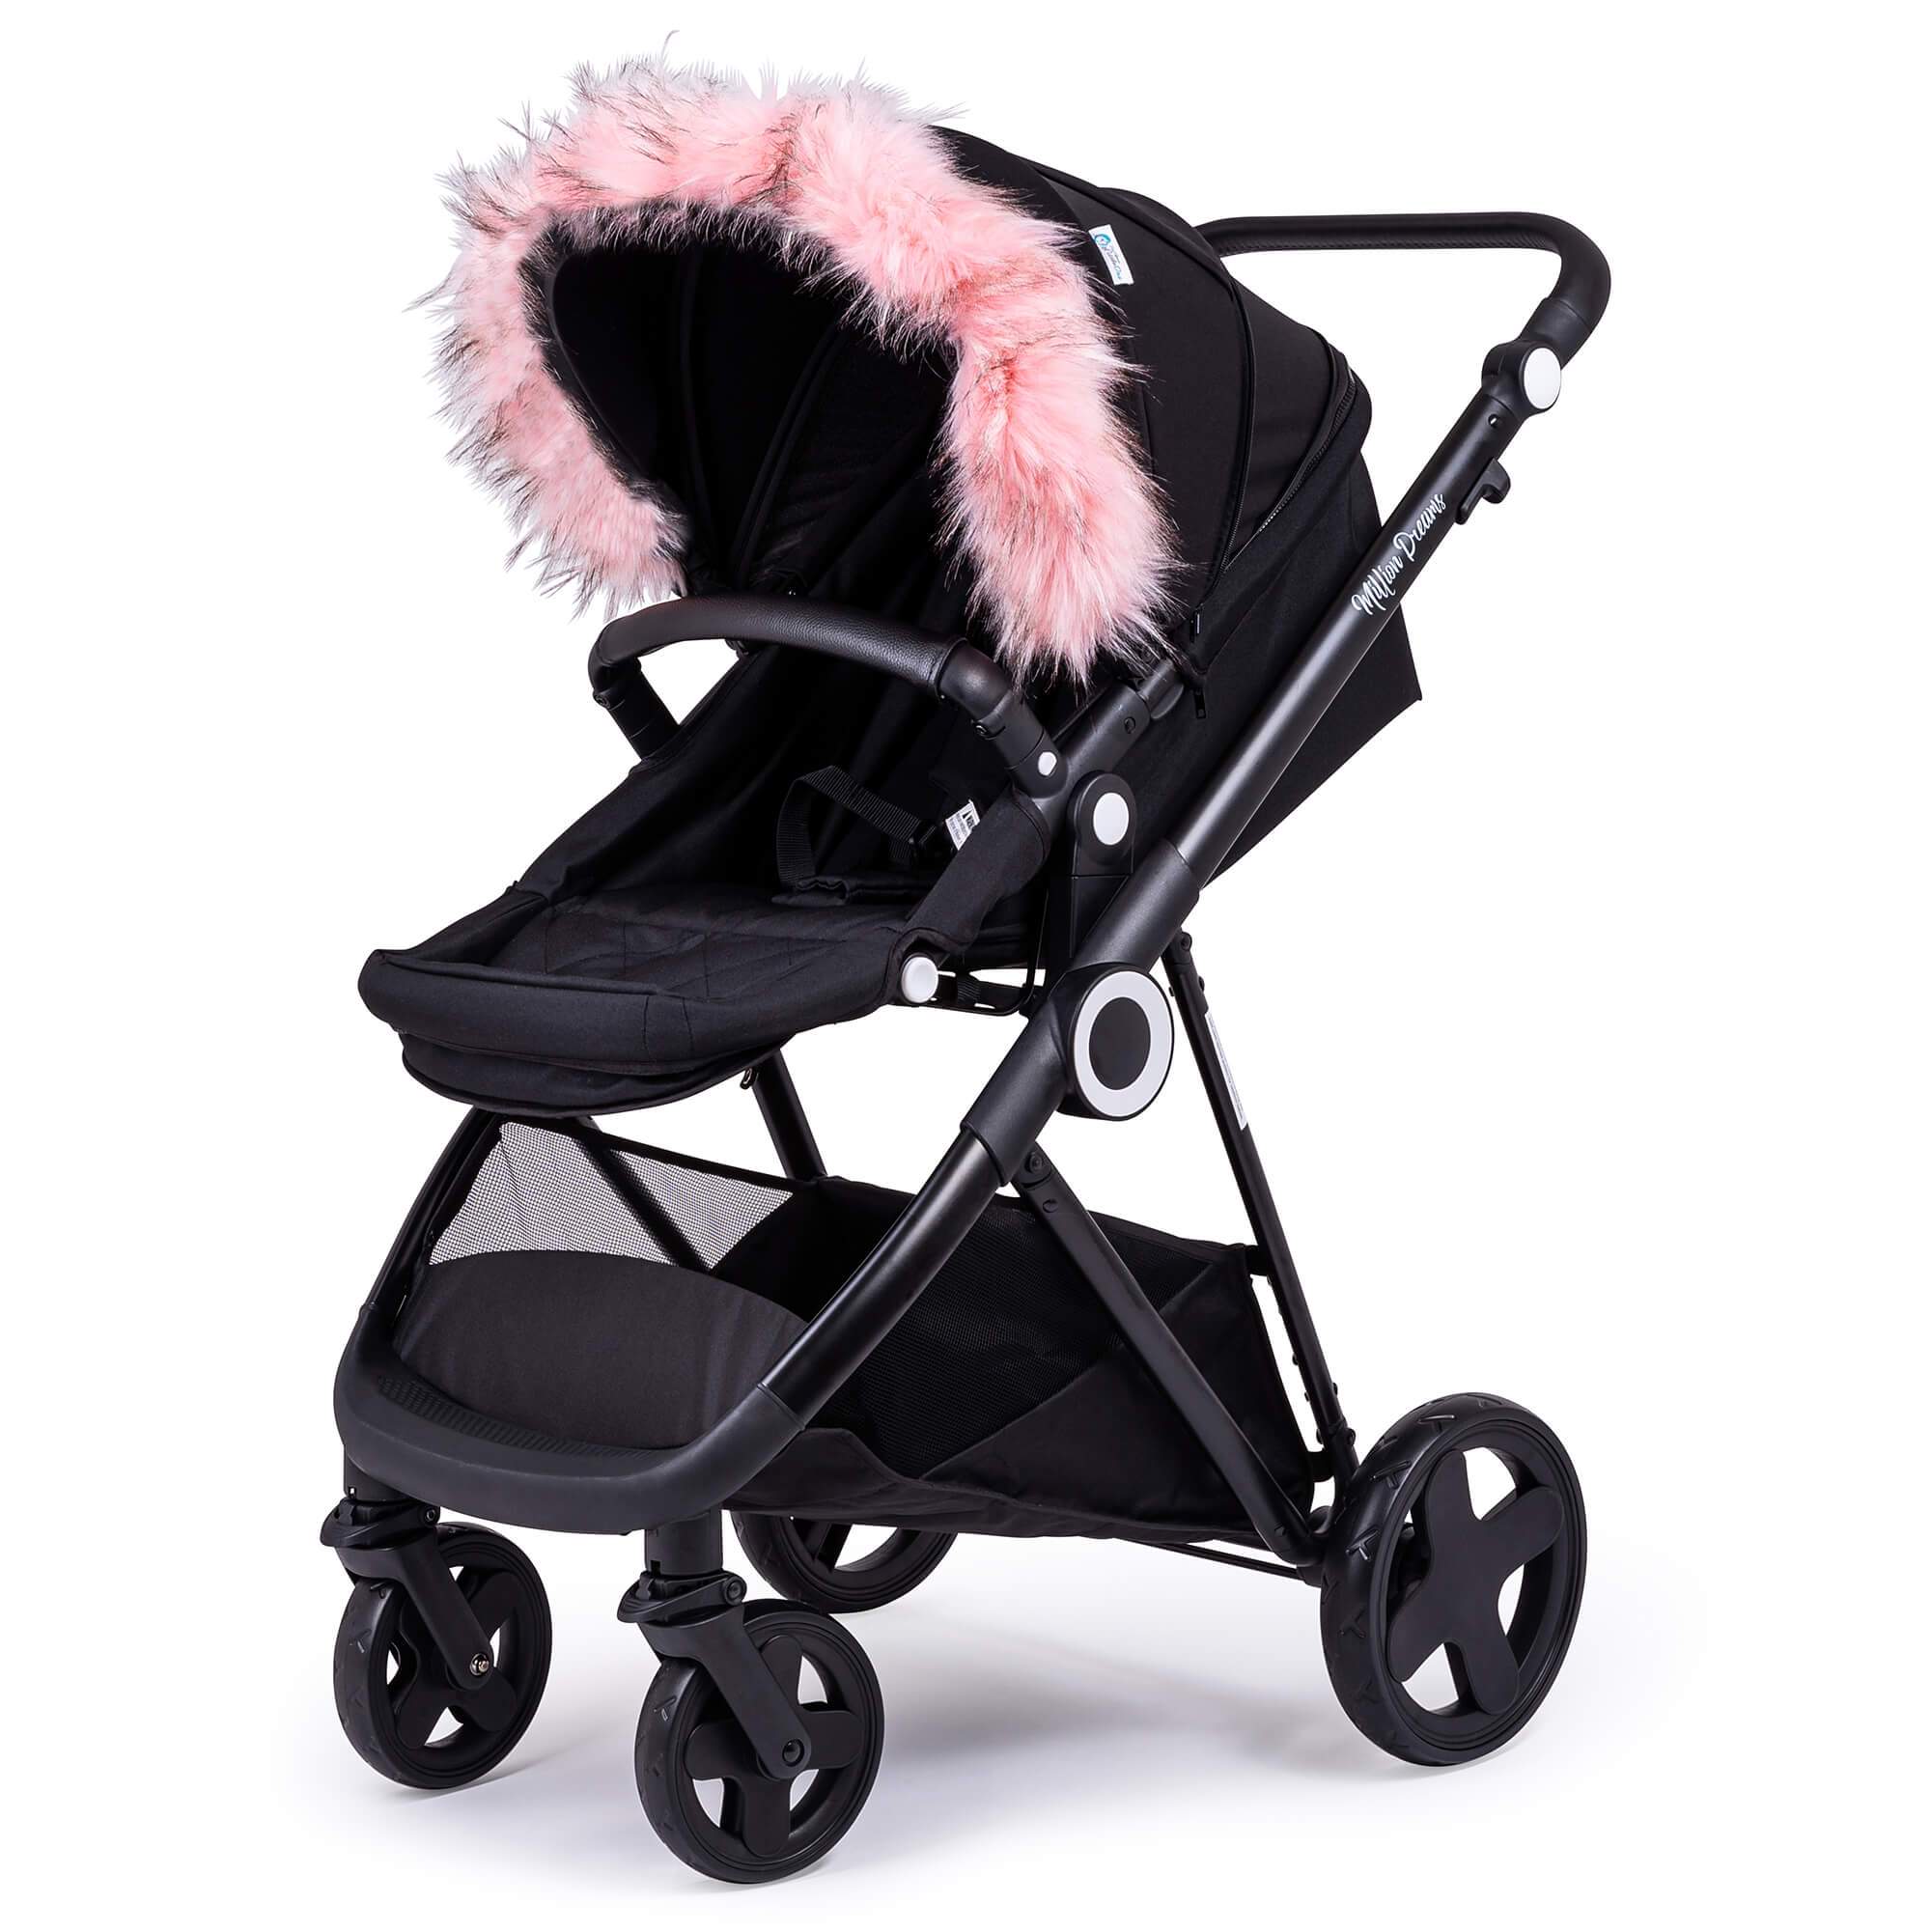 Pram Fur Hood Trim Attachment for Pushchair Compatible with Egg - Light Pink / Fits All Models | For Your Little One